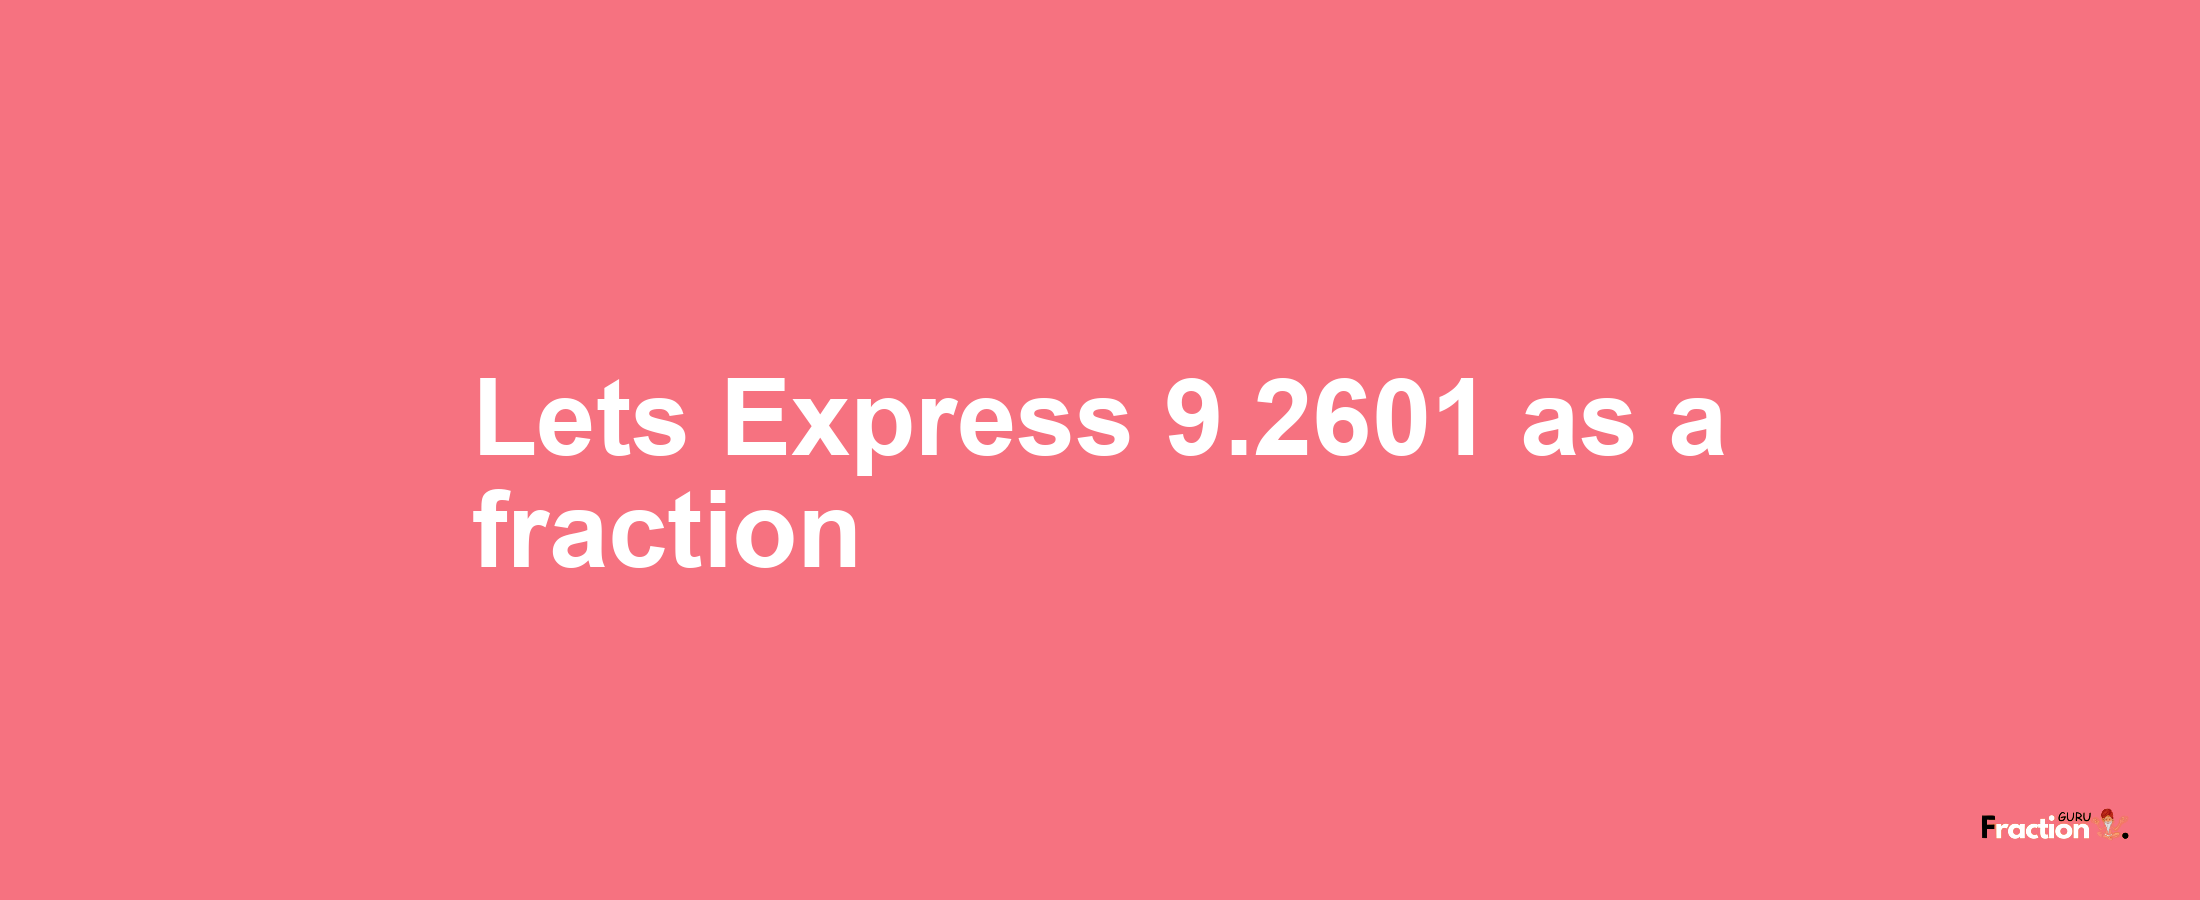 Lets Express 9.2601 as afraction